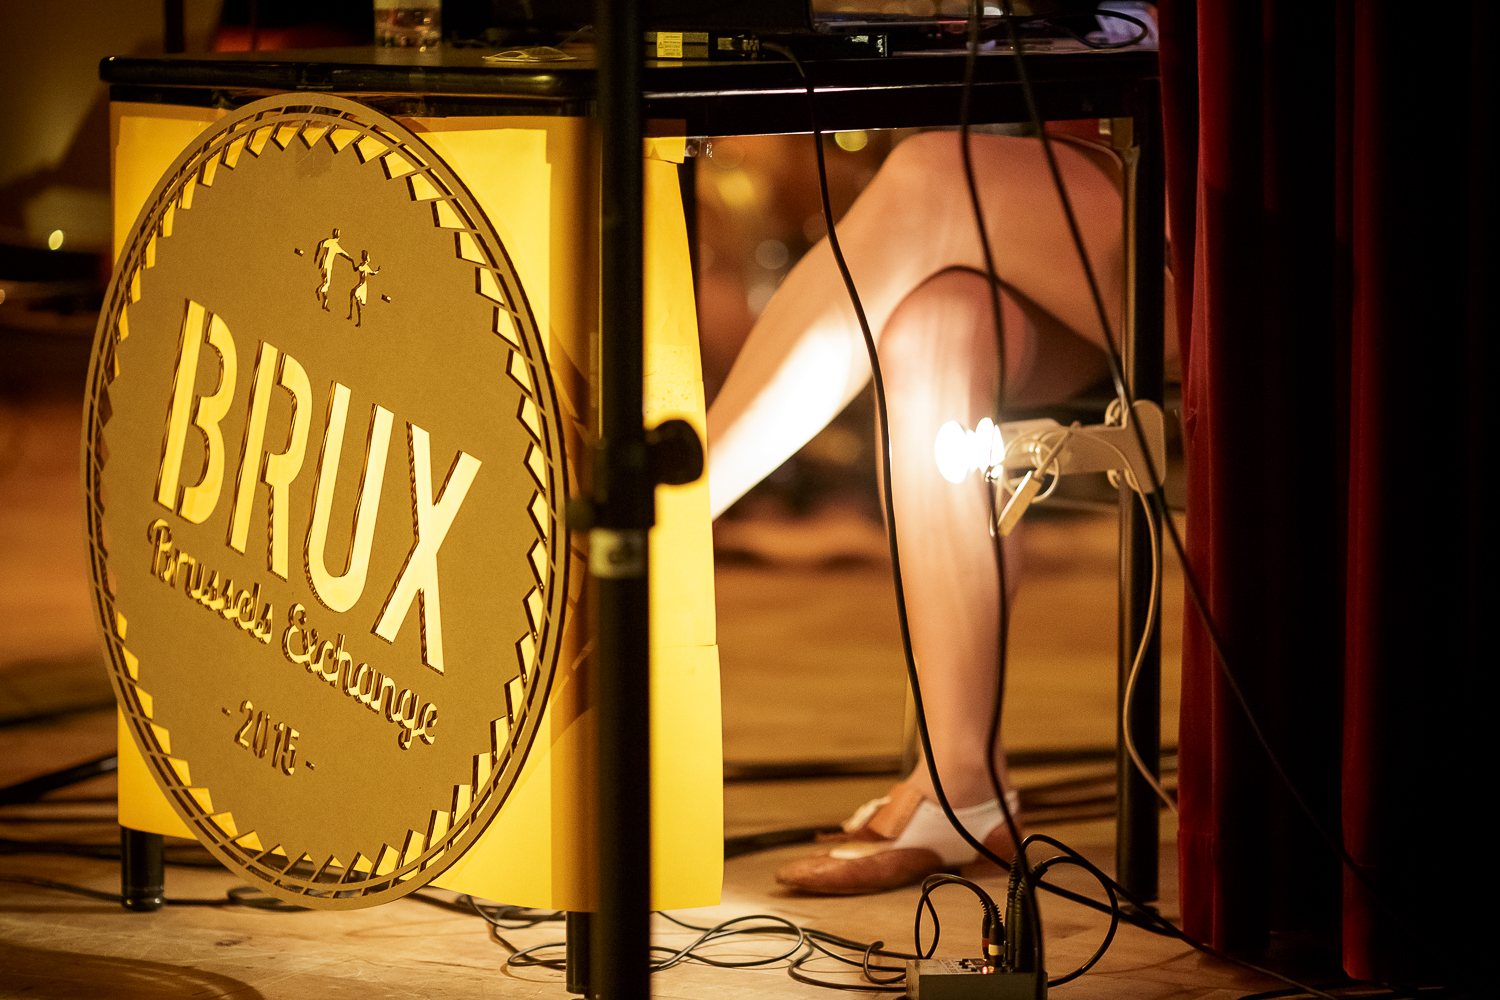  BRUX 2015 - For Dancers Only (http://d.pr/1fEEY) - http://www.ebobrie.com/brux-2015 